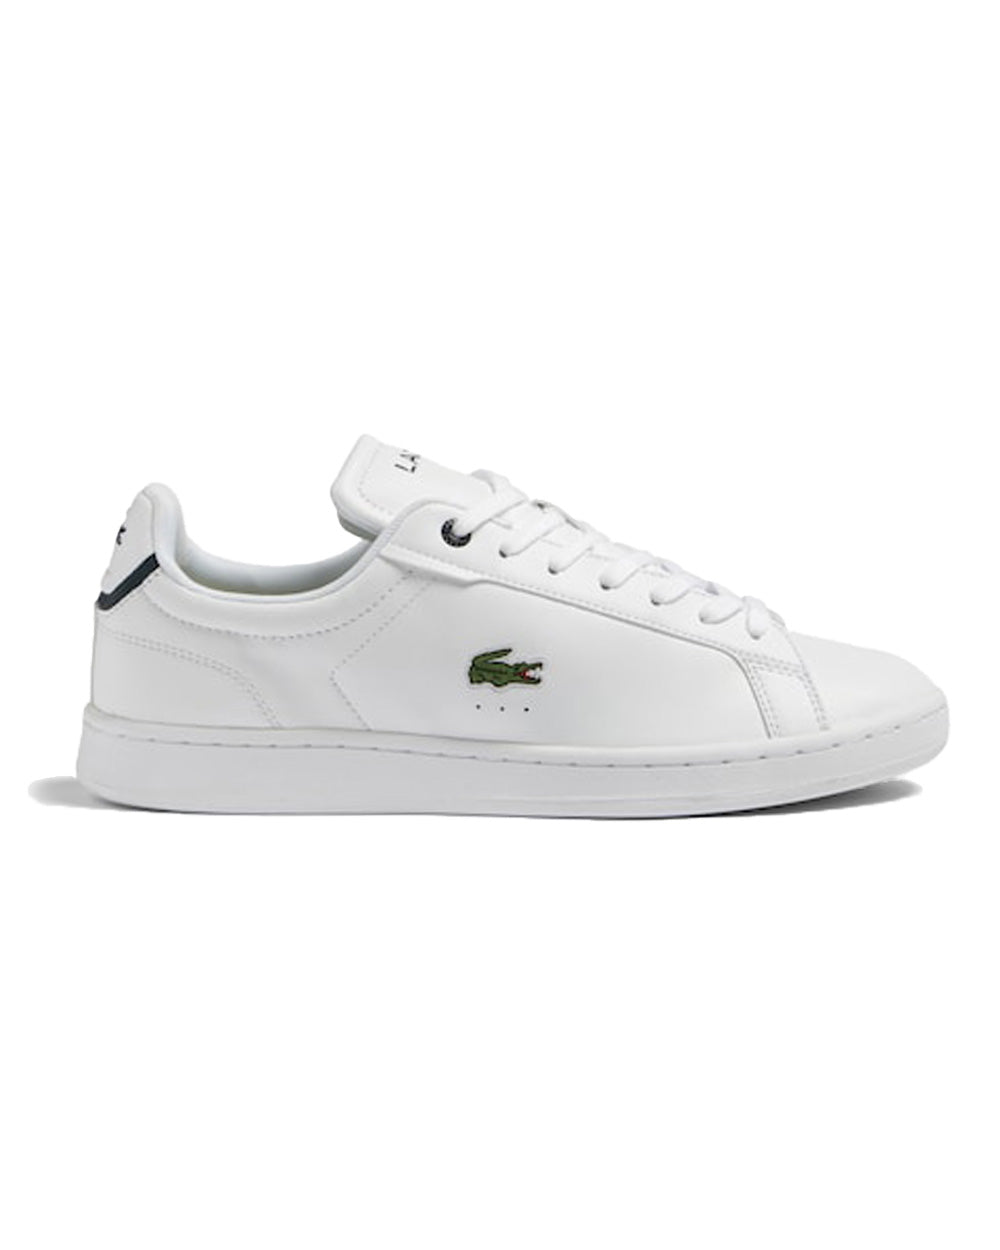 Lacoste Carnaby Pro BL23 1 SMA (white/navy)